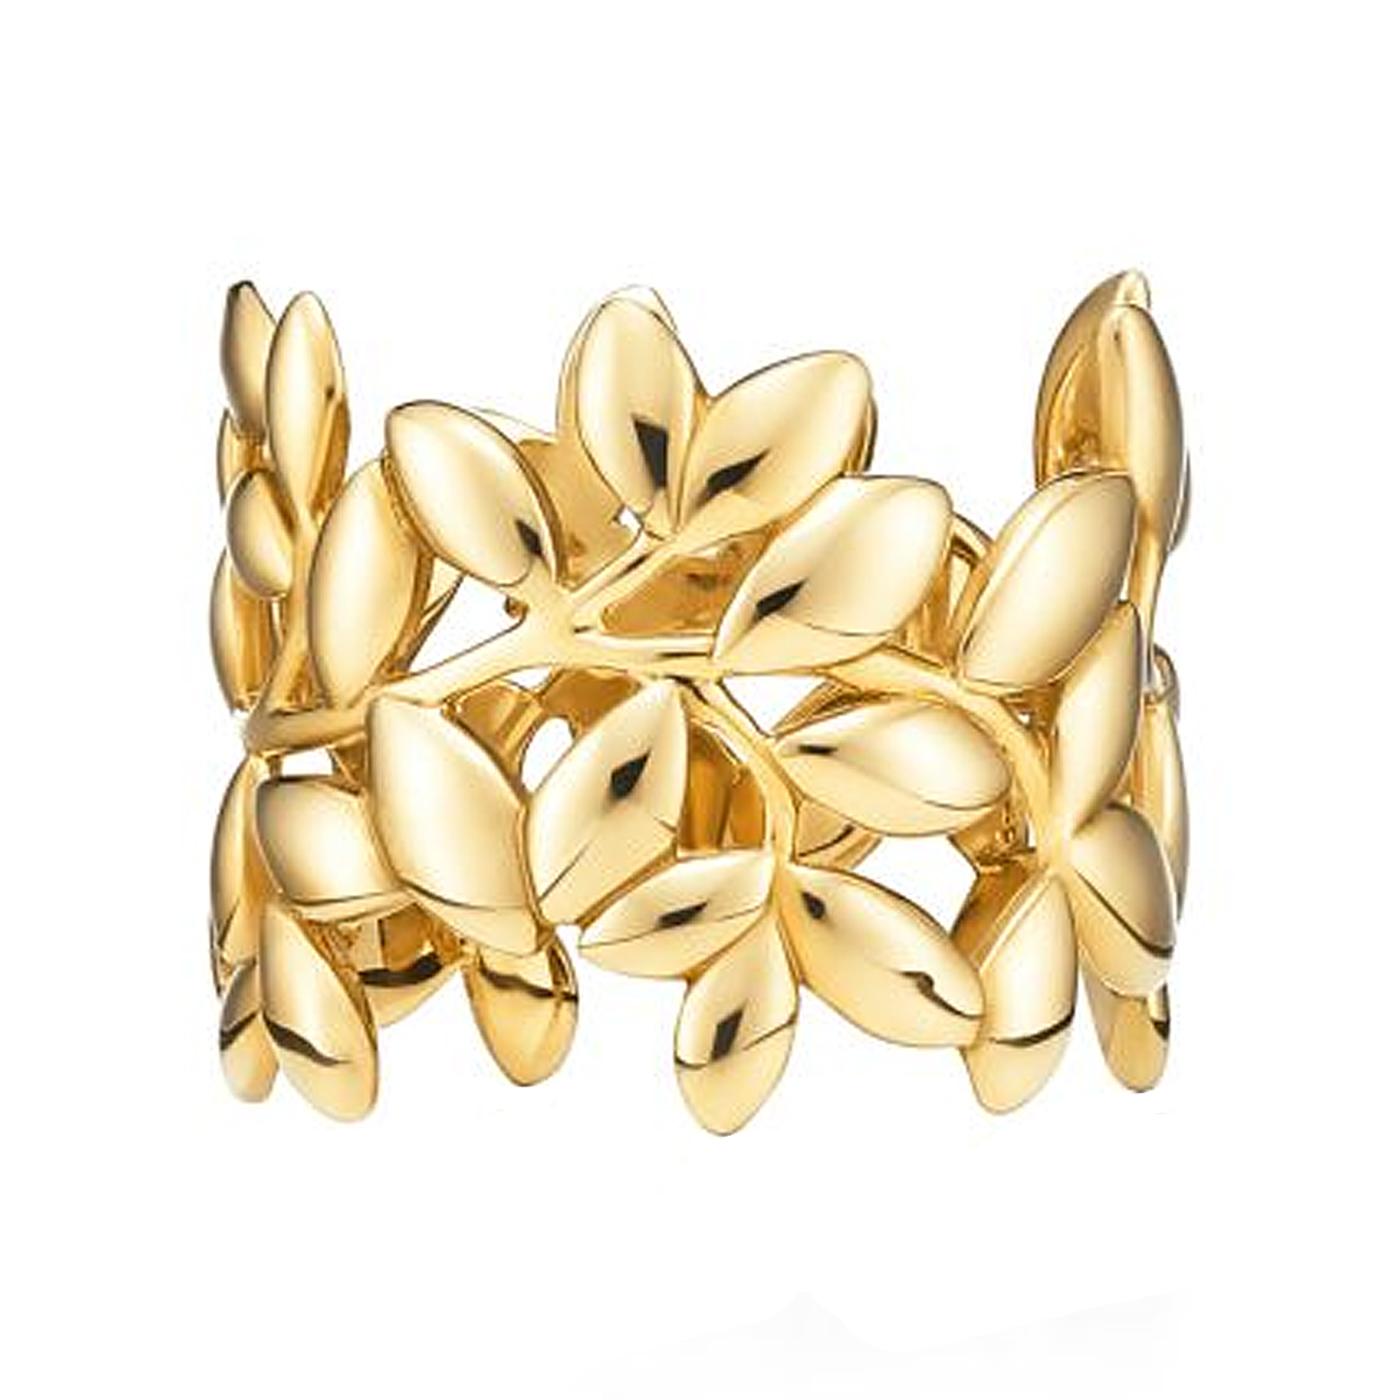 With beautifully sculpted leaves in 18k gold, Paloma honors the olive branch, a symbol of peace and abundance. Band ring in 18k gold. Original designs by Paloma Picasso. Paloma Picasso’s creations artfully combine timeless sophistication with bold